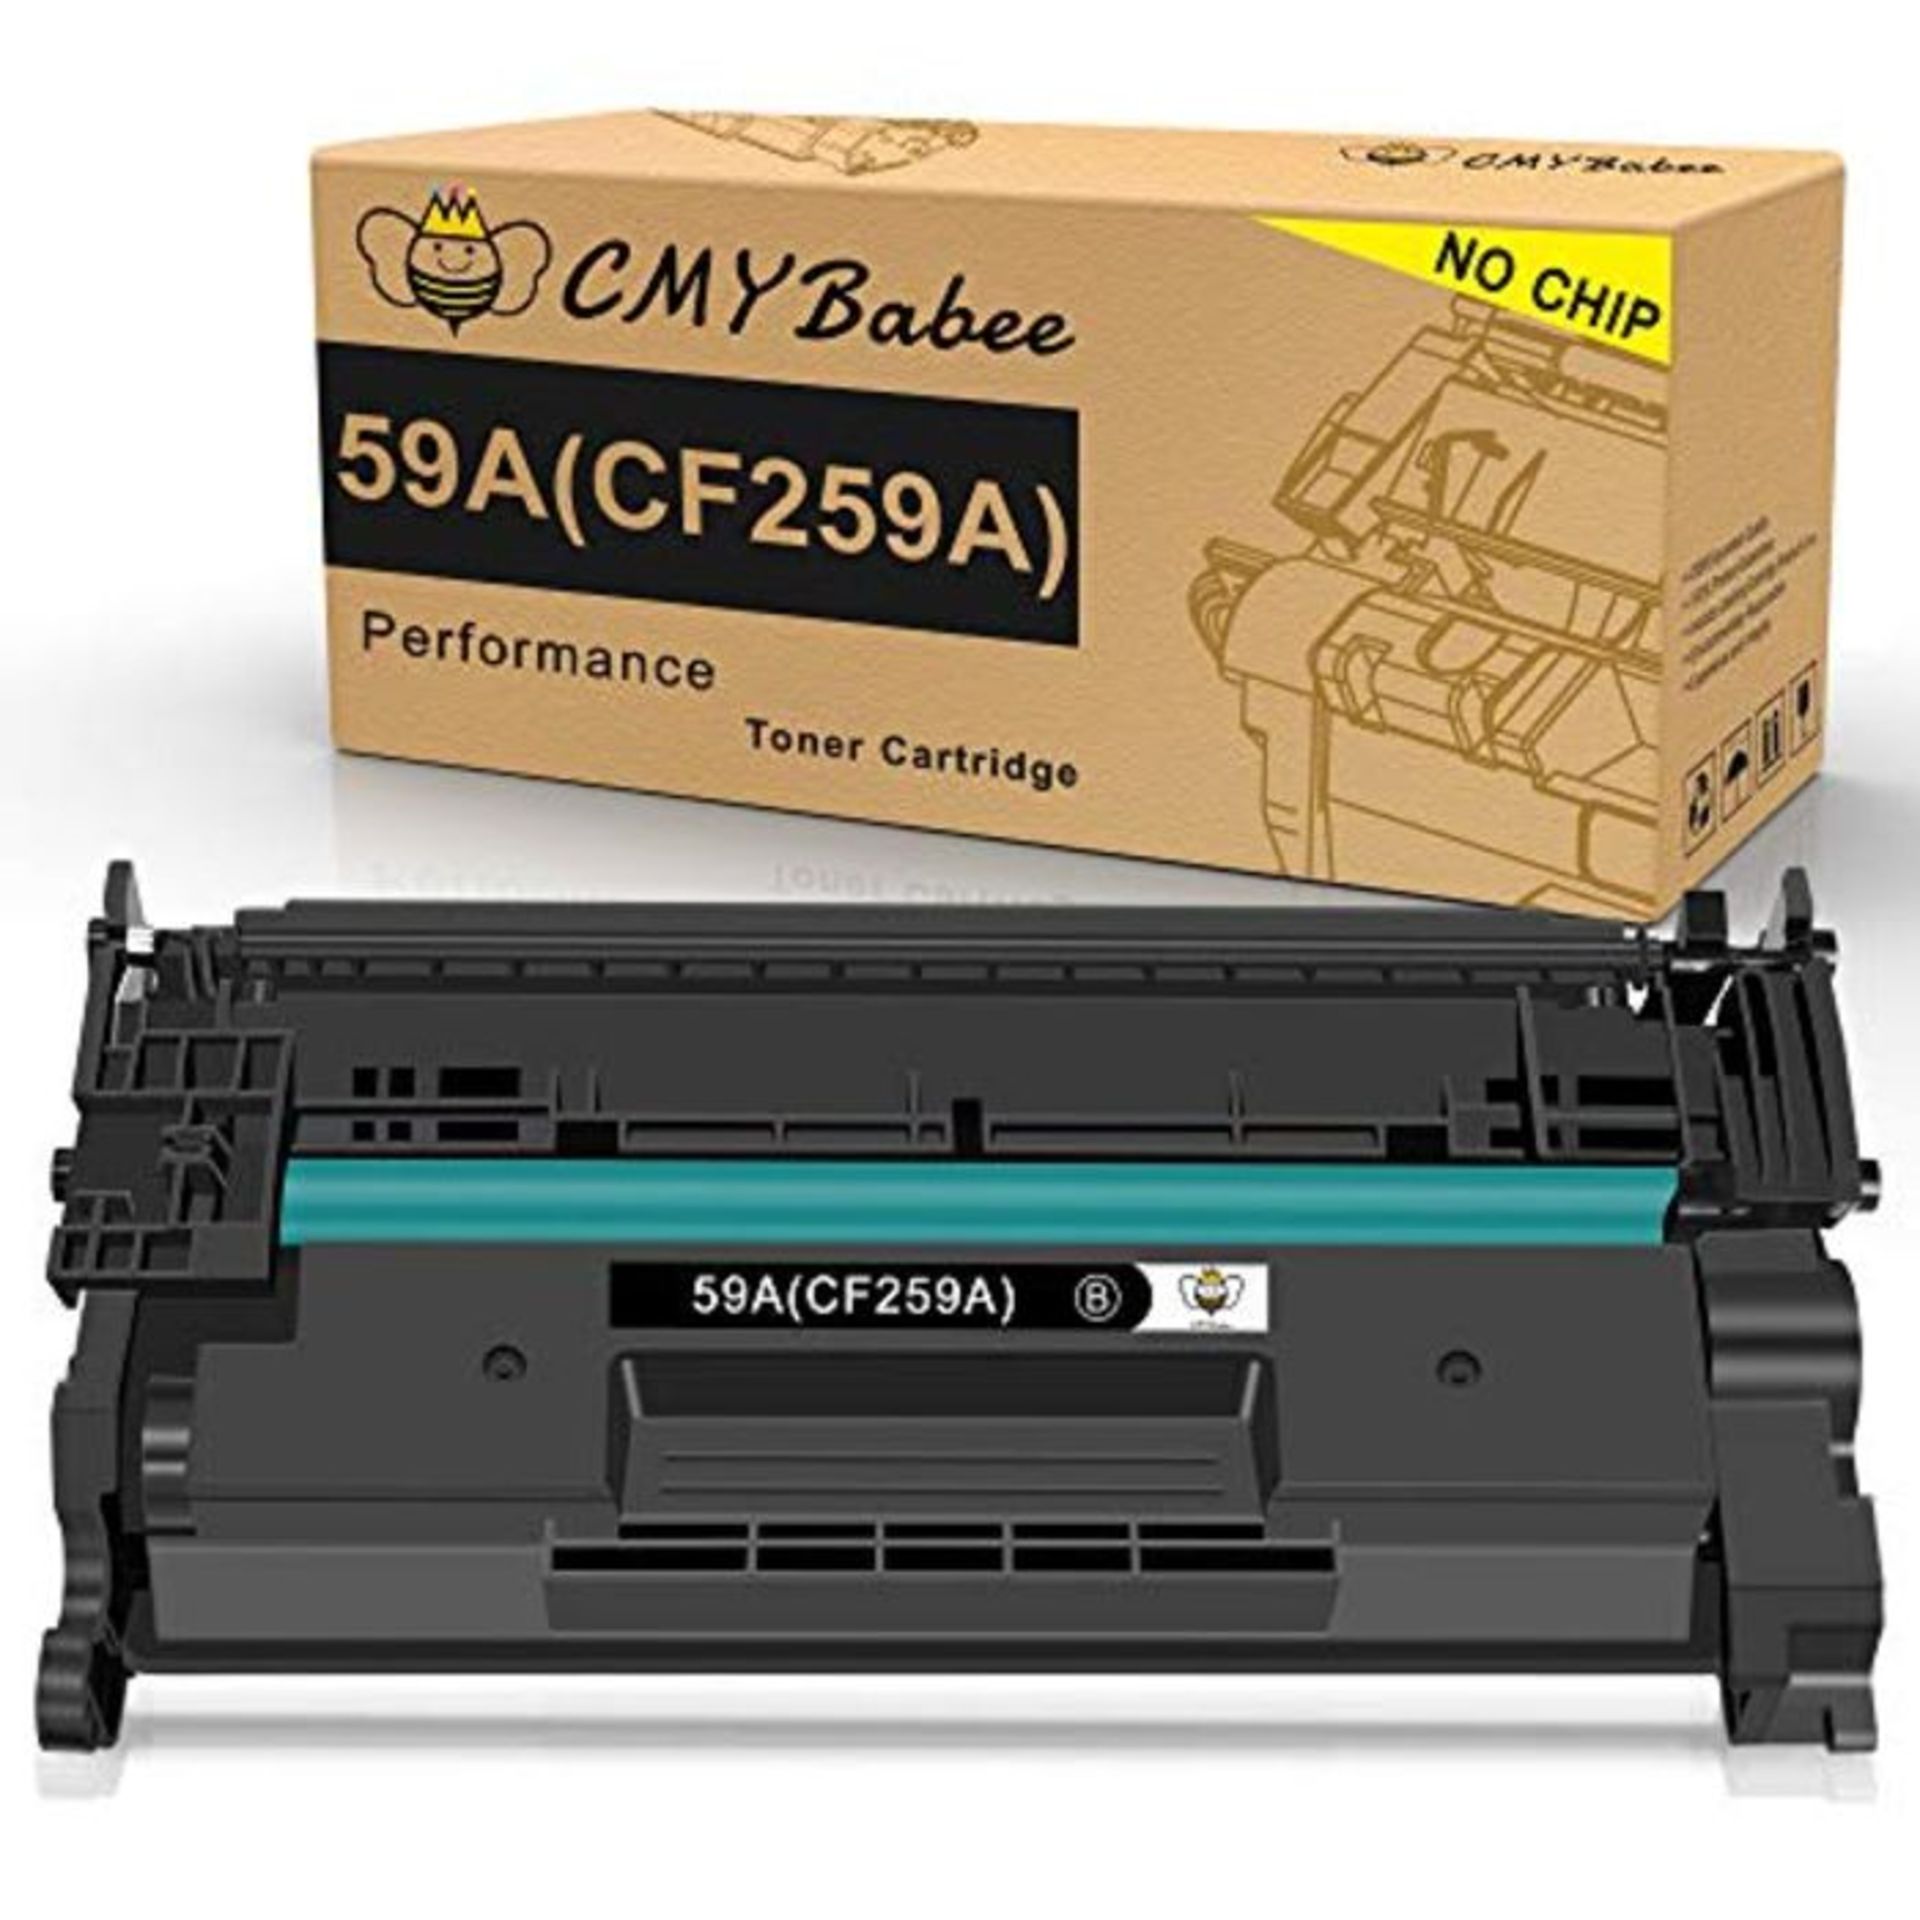 CMYBabee Compatible for HP CF259A CF259X 59A 59X Toner Cartridge for HP Laserjet Pro M